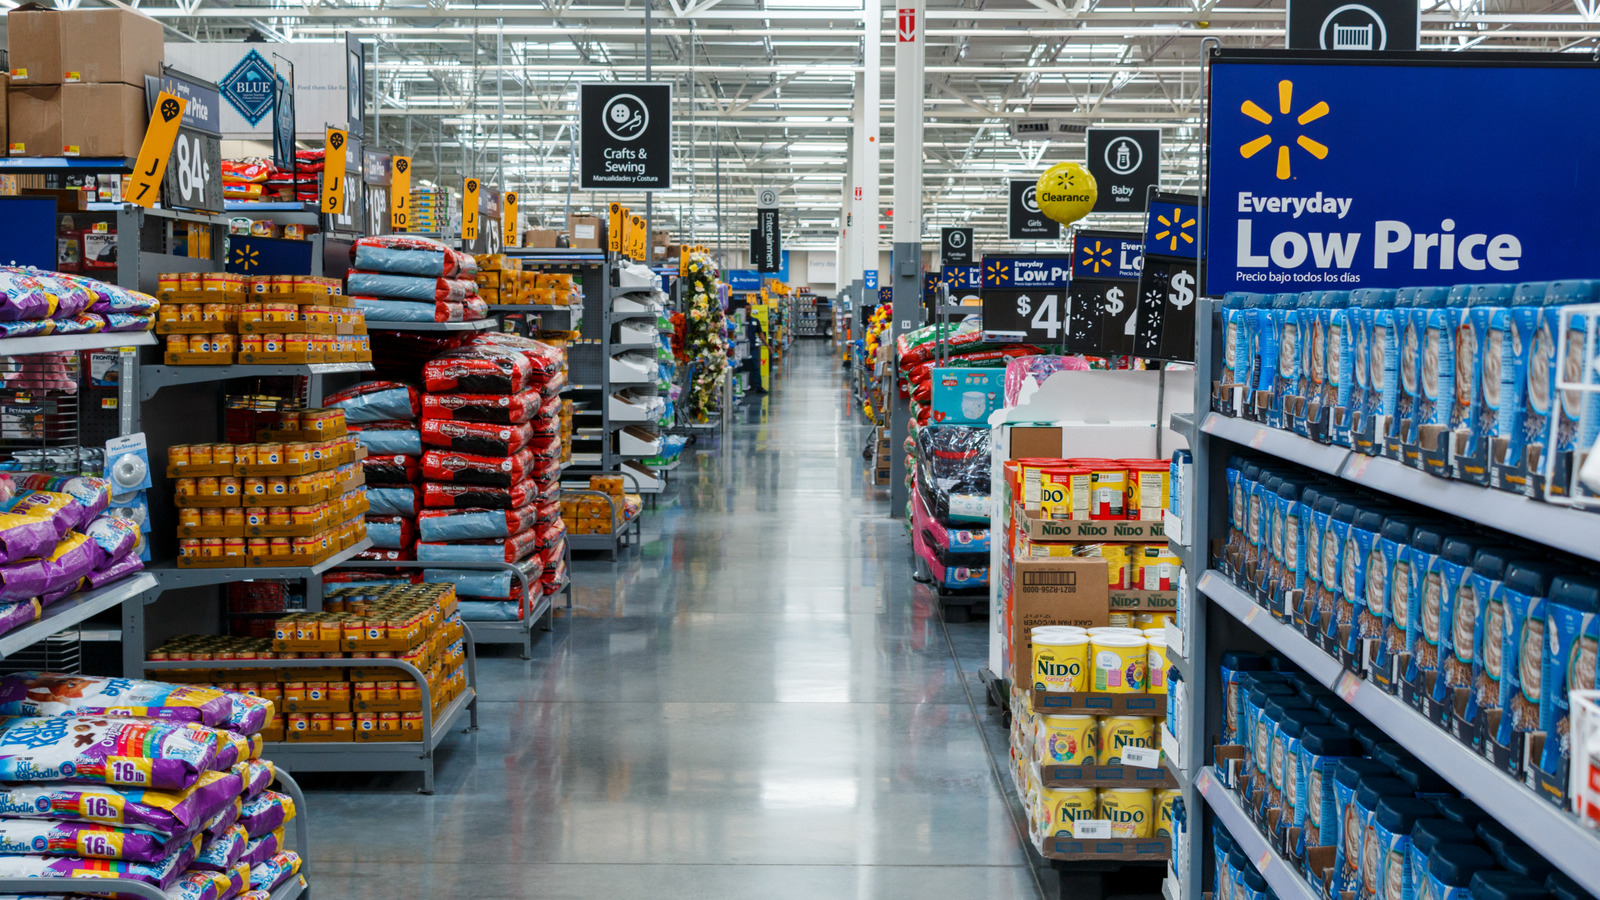 Walmart Returns Hours In 2022 [All You Need To Know]